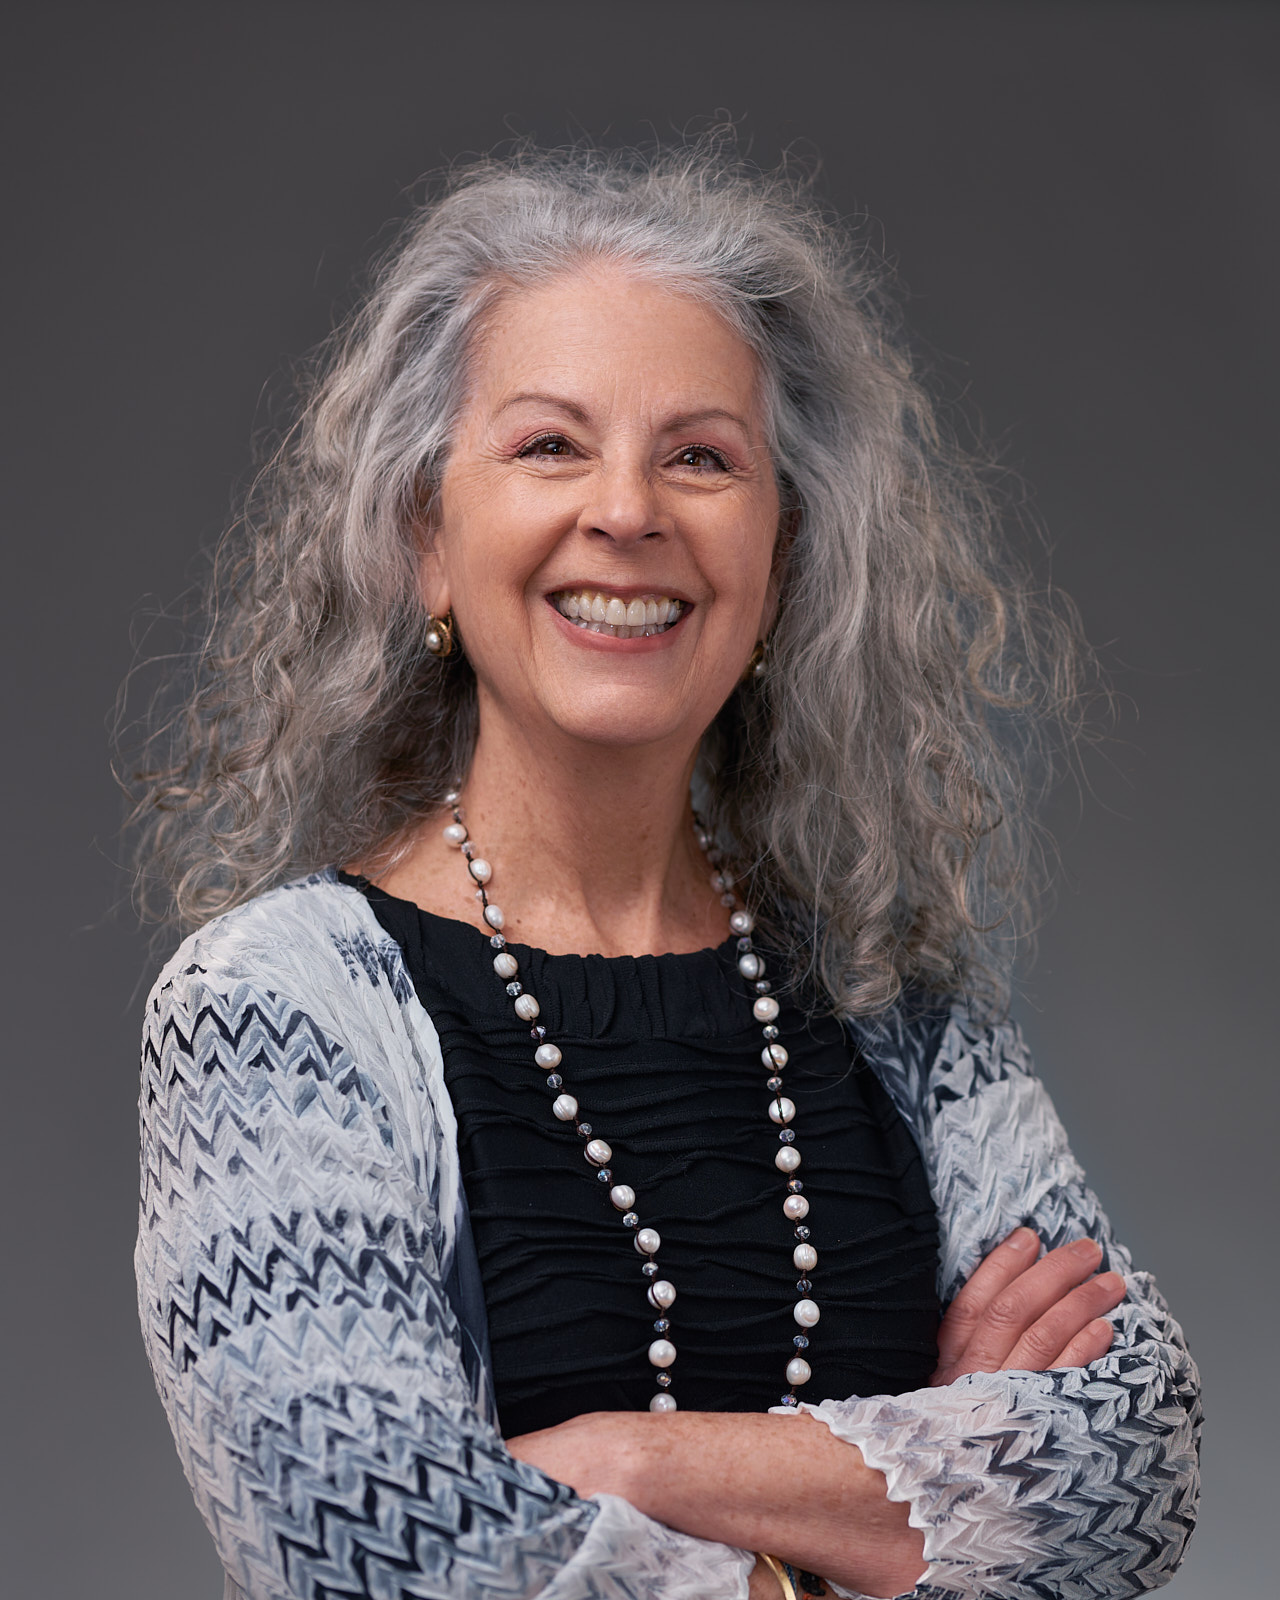 A woman with long grey hair smiling for the camera.